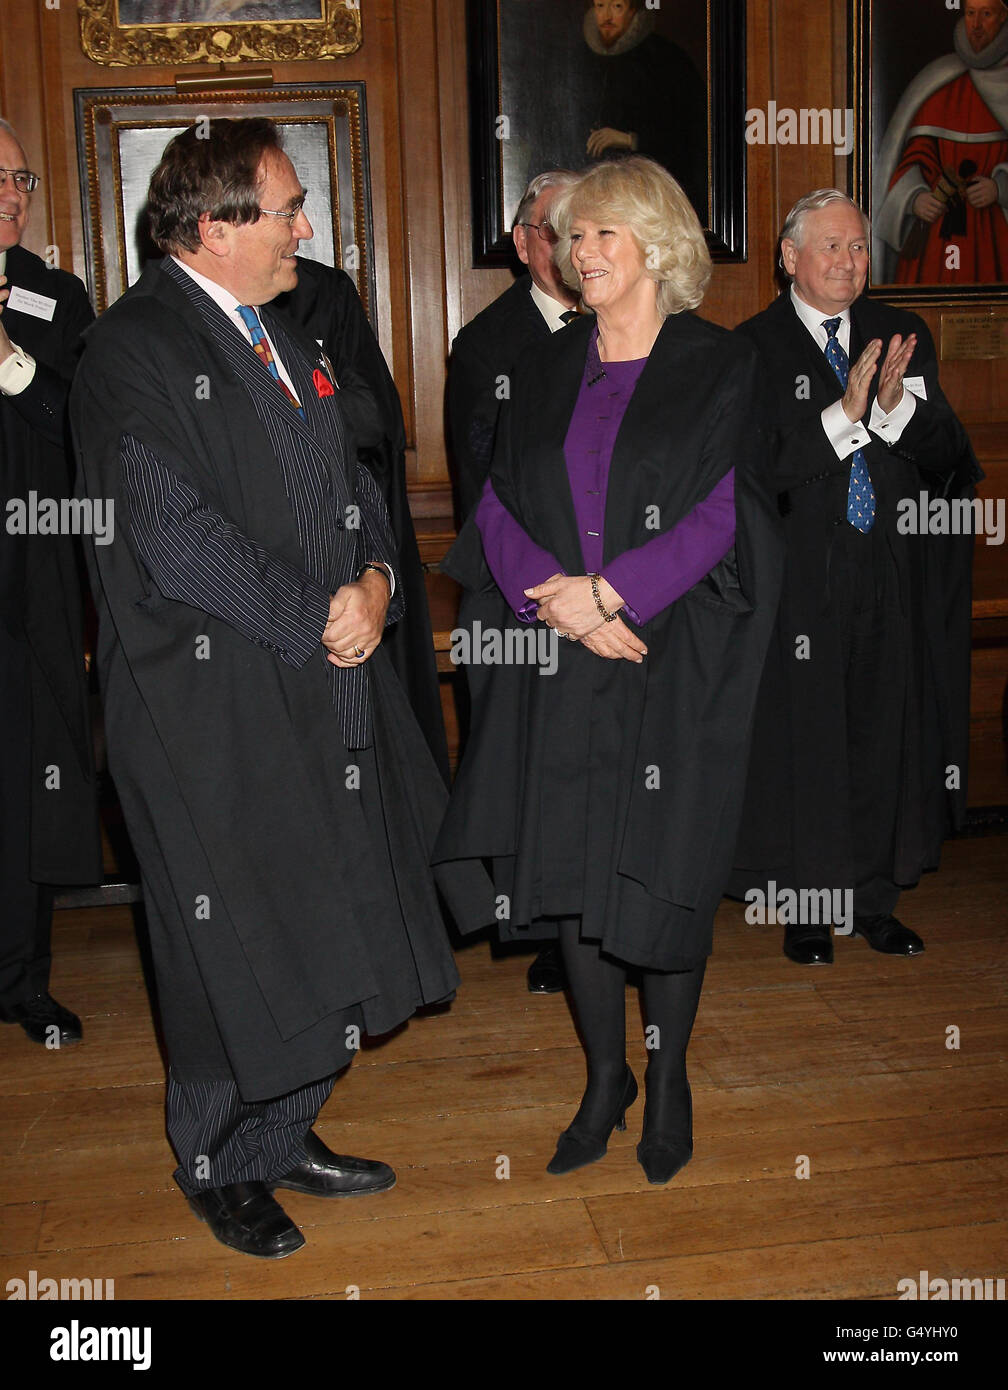 The Duchess of Cornwall wears a masters gown as she is made an Honourable Royal Bencher at the Honourable Society, Gray's Inn, London, where she spoke of the importance of challenging the brain in old age as she was made an honorary barrister. Stock Photo